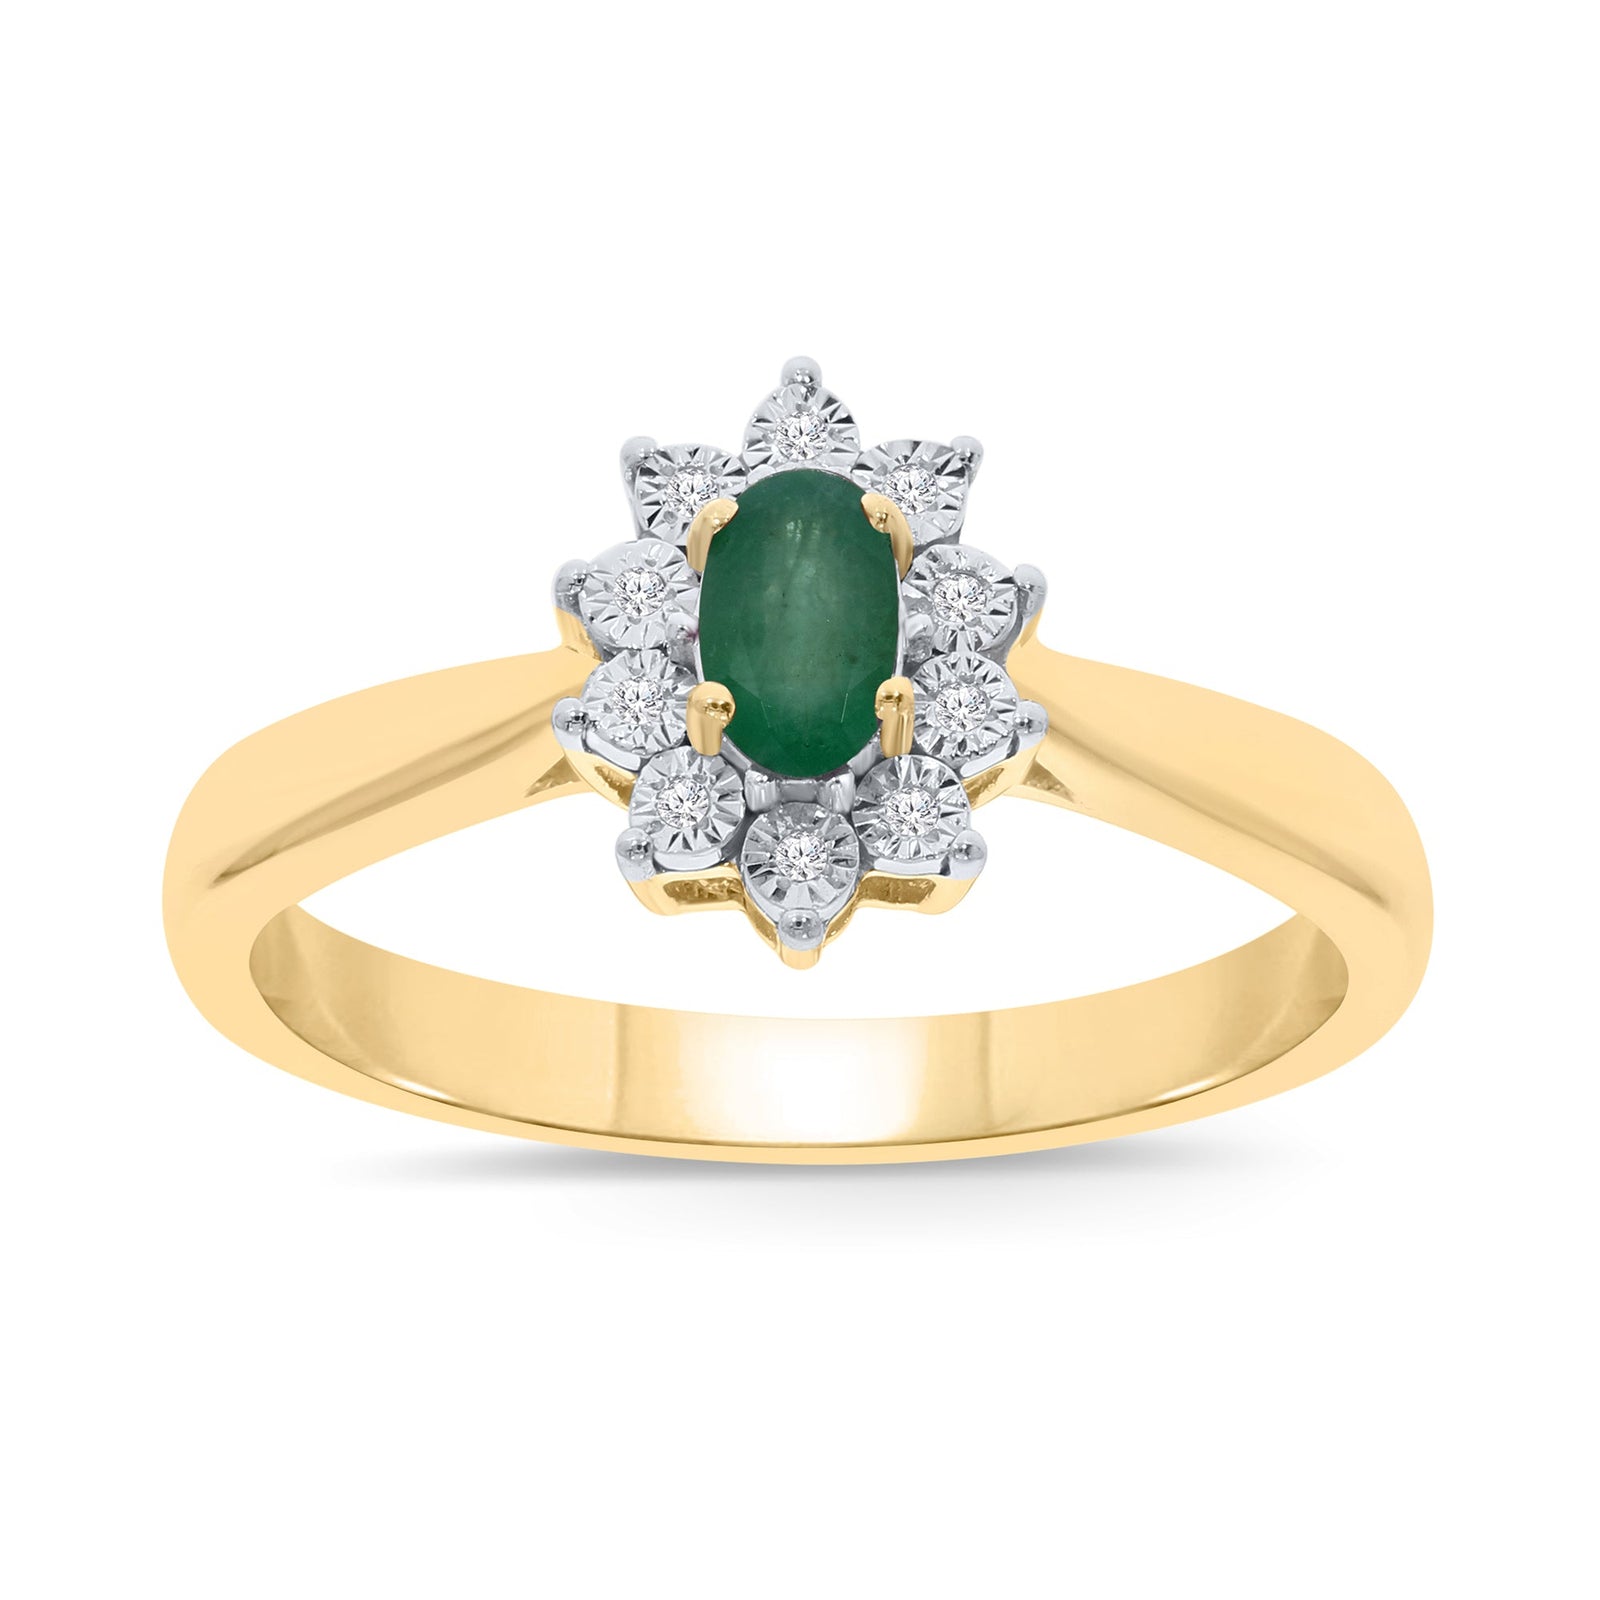 9ct gold 5x3mm oval emerald & miracle plate diamond cluster ring 0.03ct